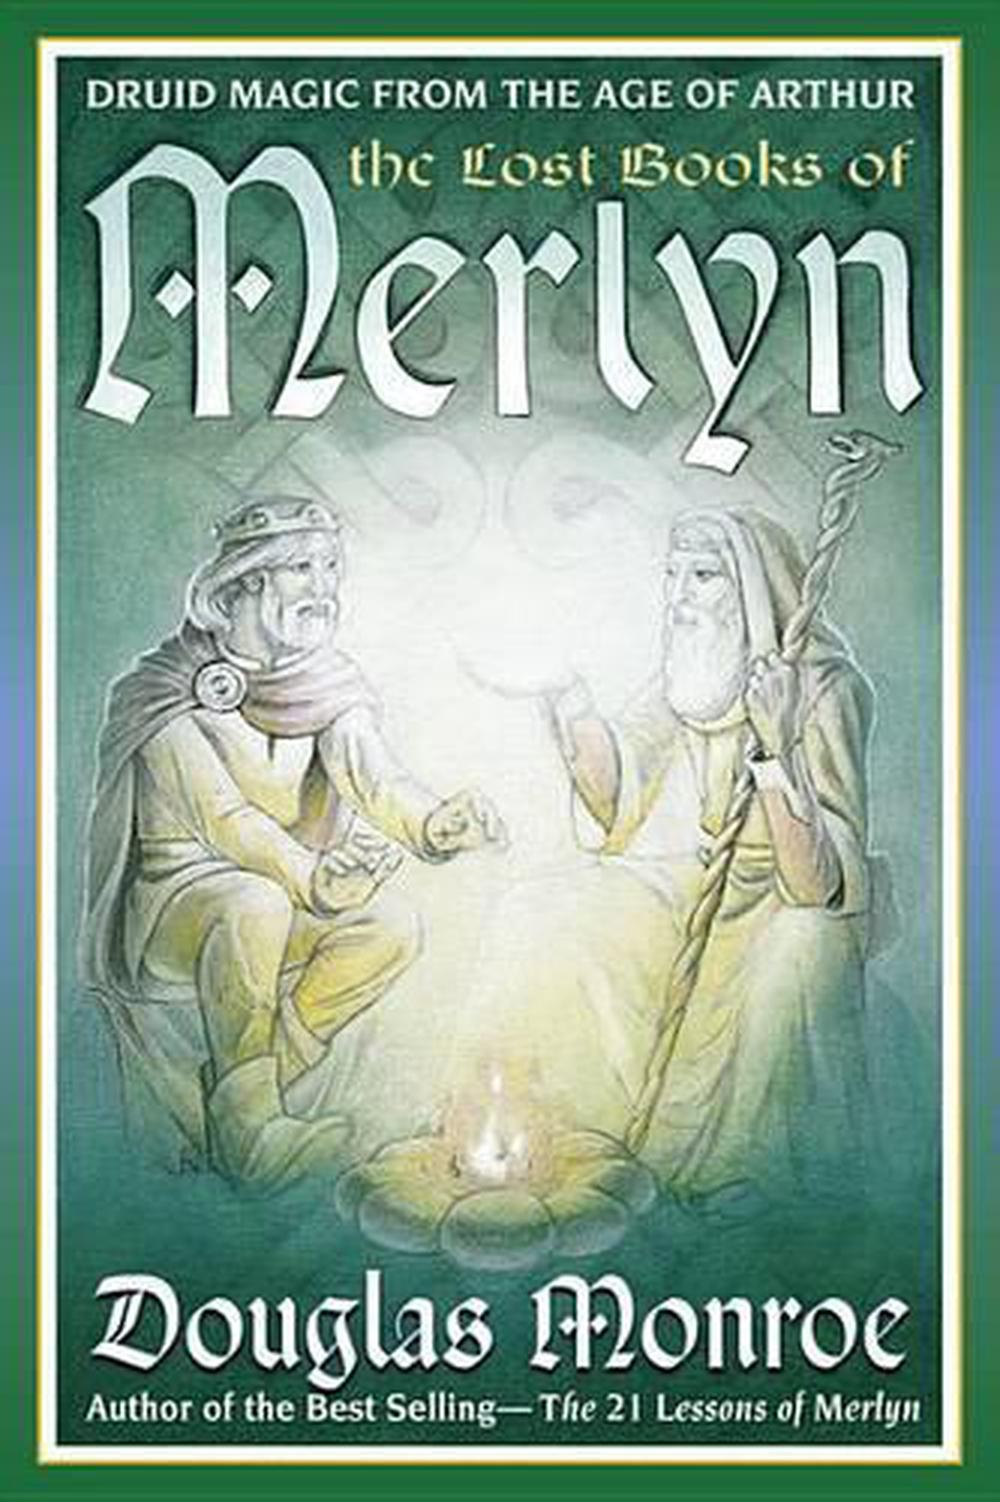 The Lost Books of Merlyn Druid Magic from the Age of Arthur by Douglas